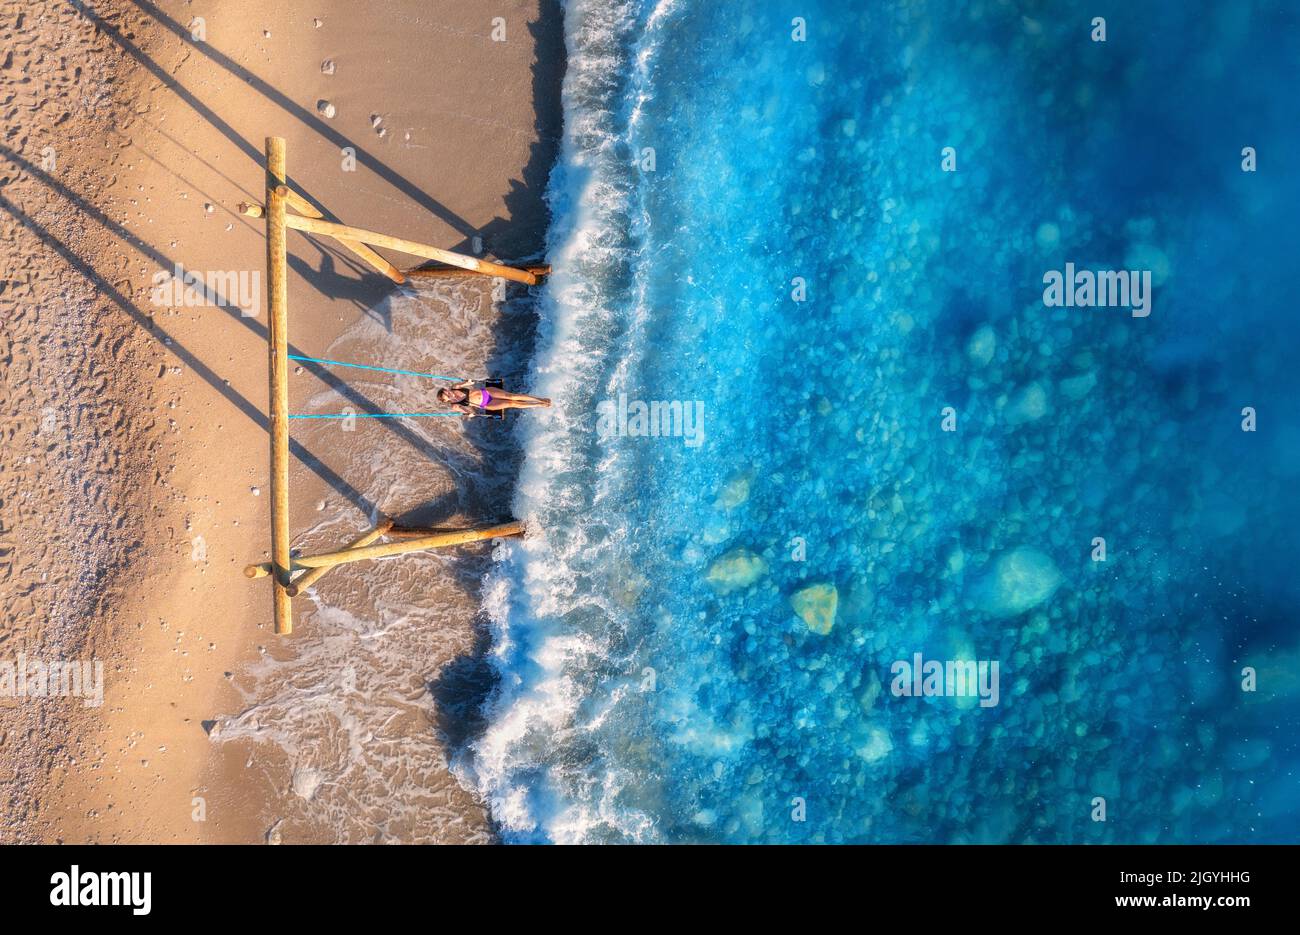 Aerial view of woman on the swing, beautiful blue sea with waves Stock Photo